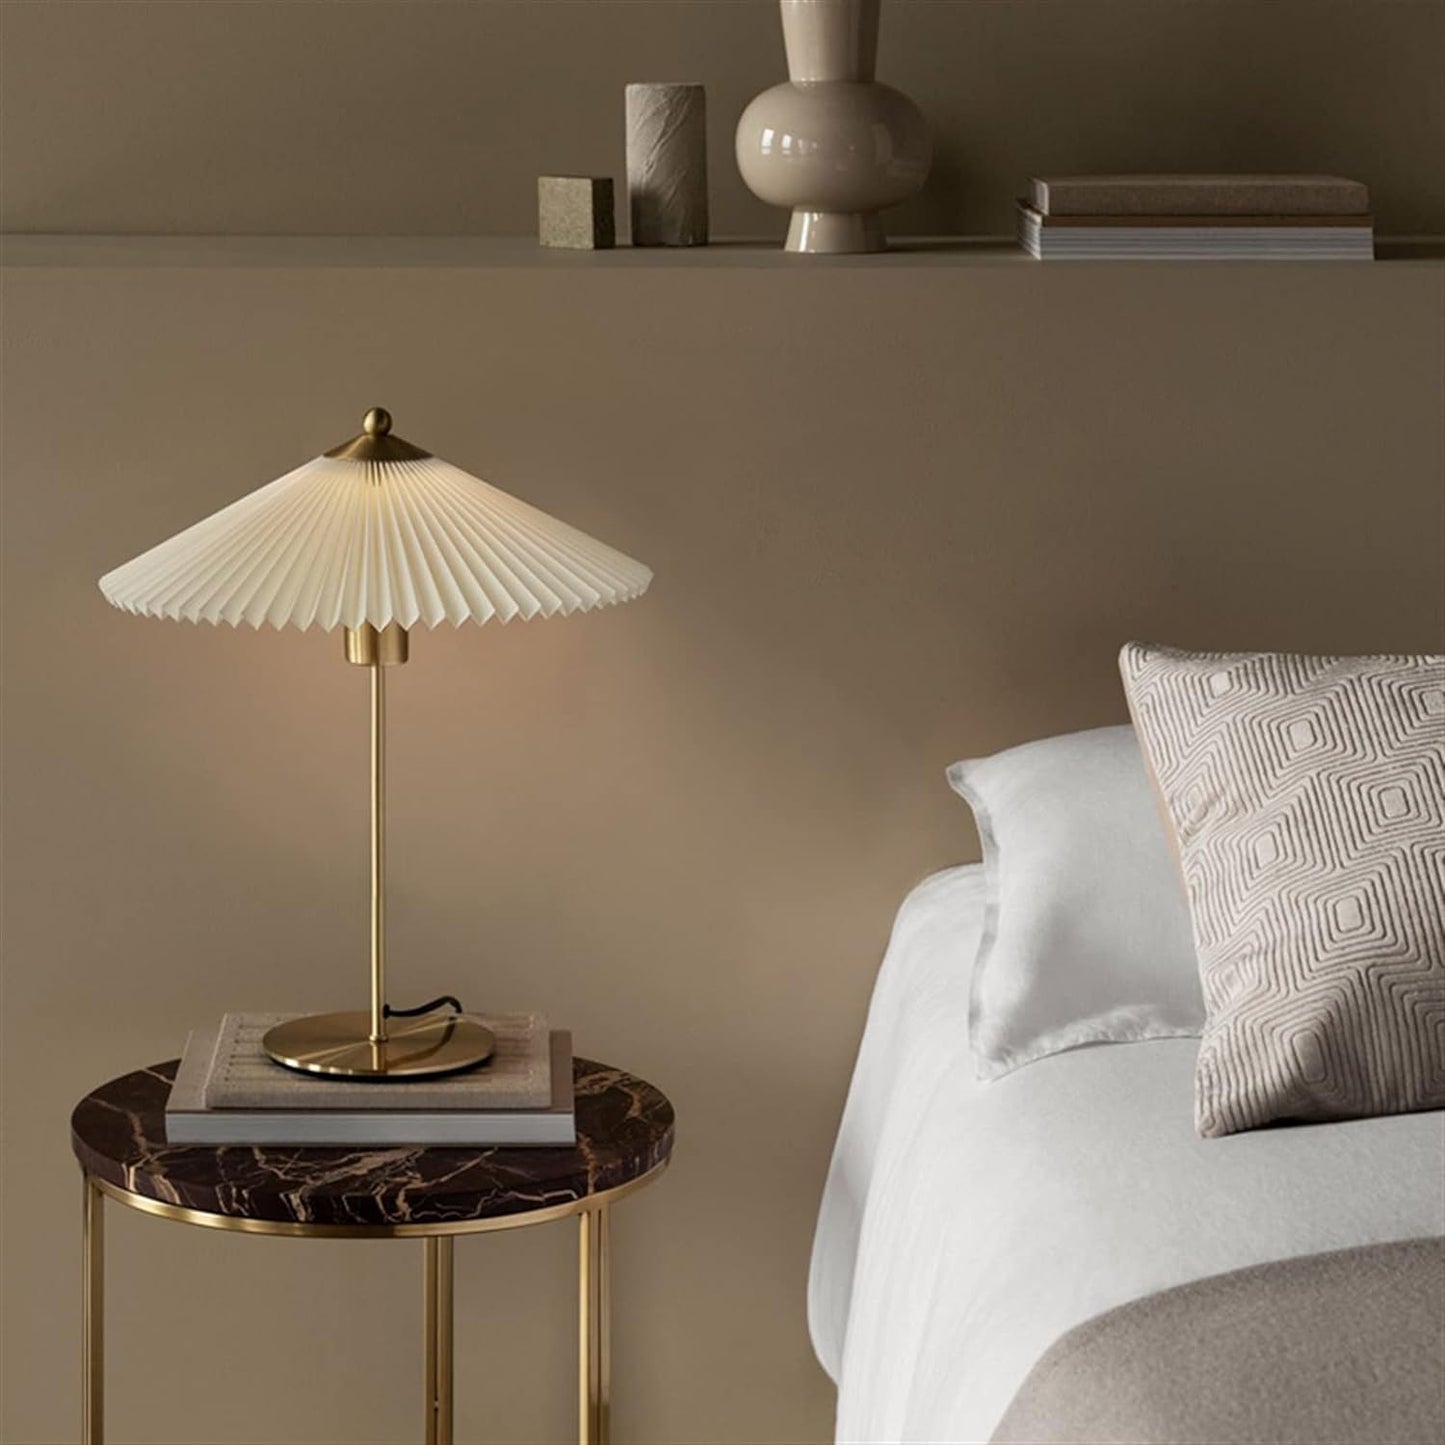 Hdc Nordic Living Room Bedroom Bedside Lamp Retro Pleated Table Lamp